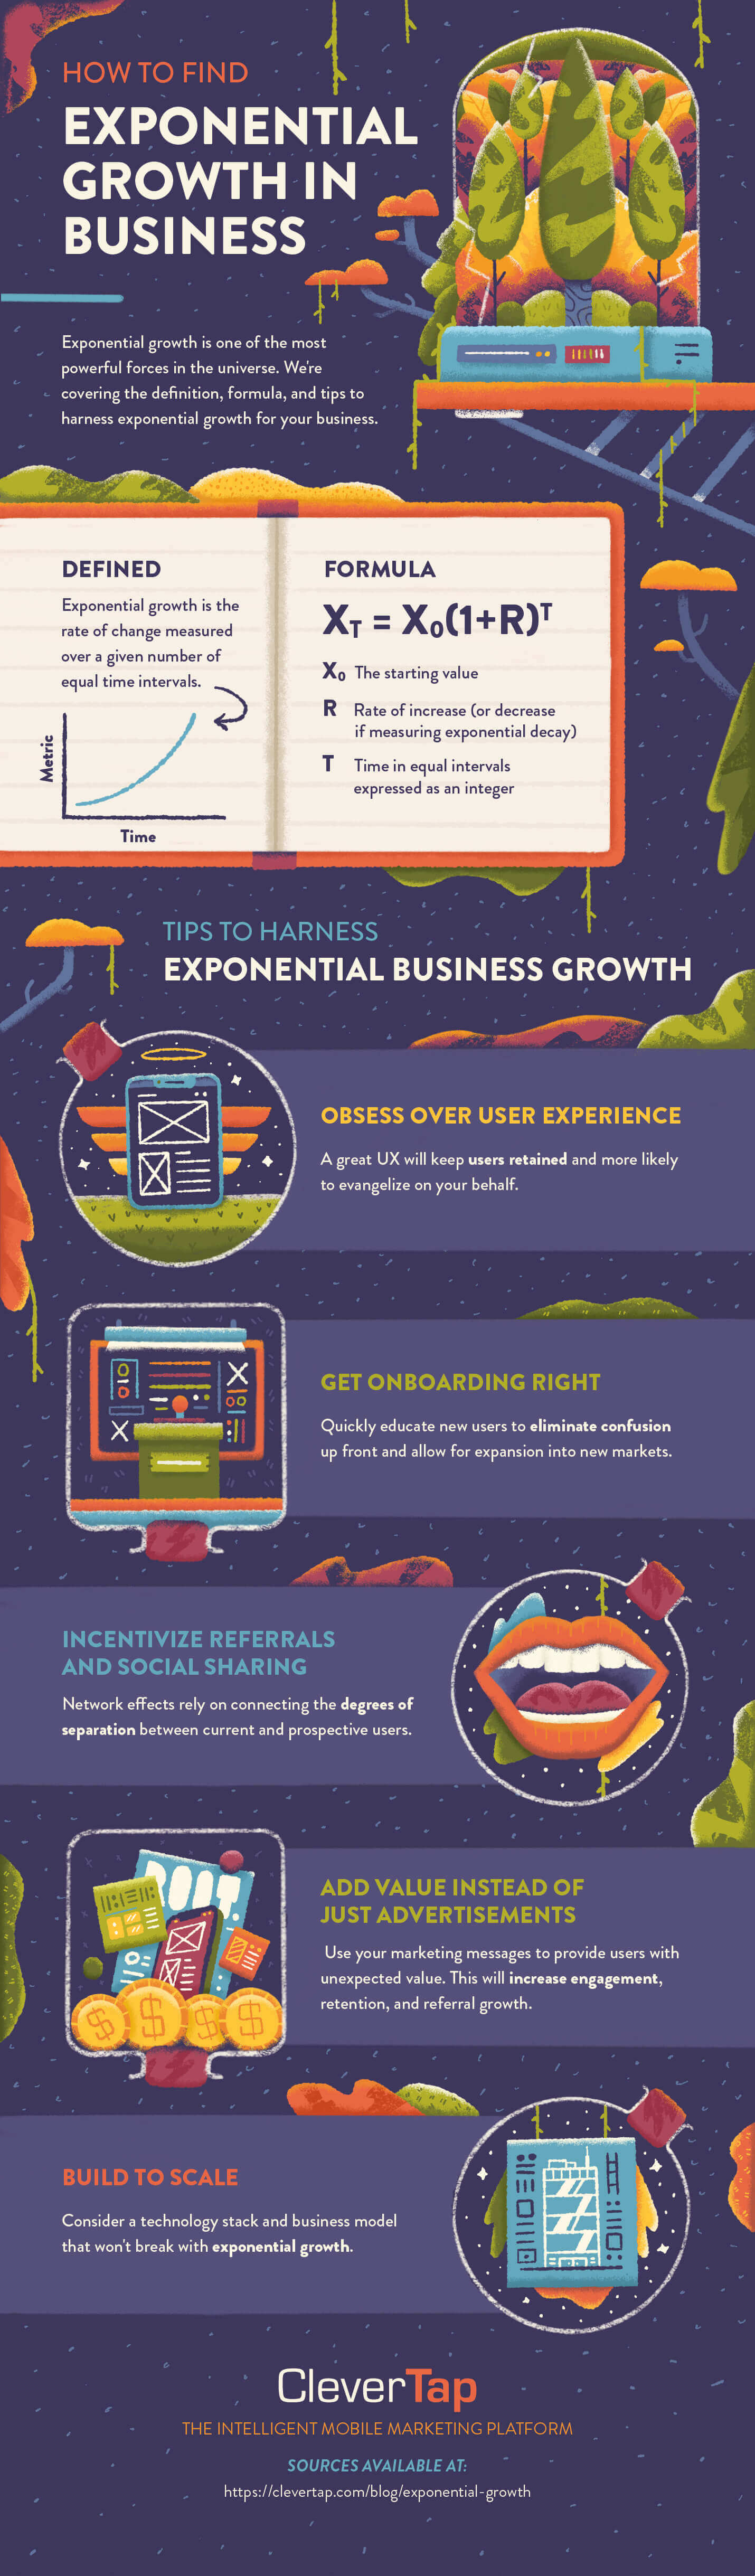 exponential growth definition, examples, tips infographic